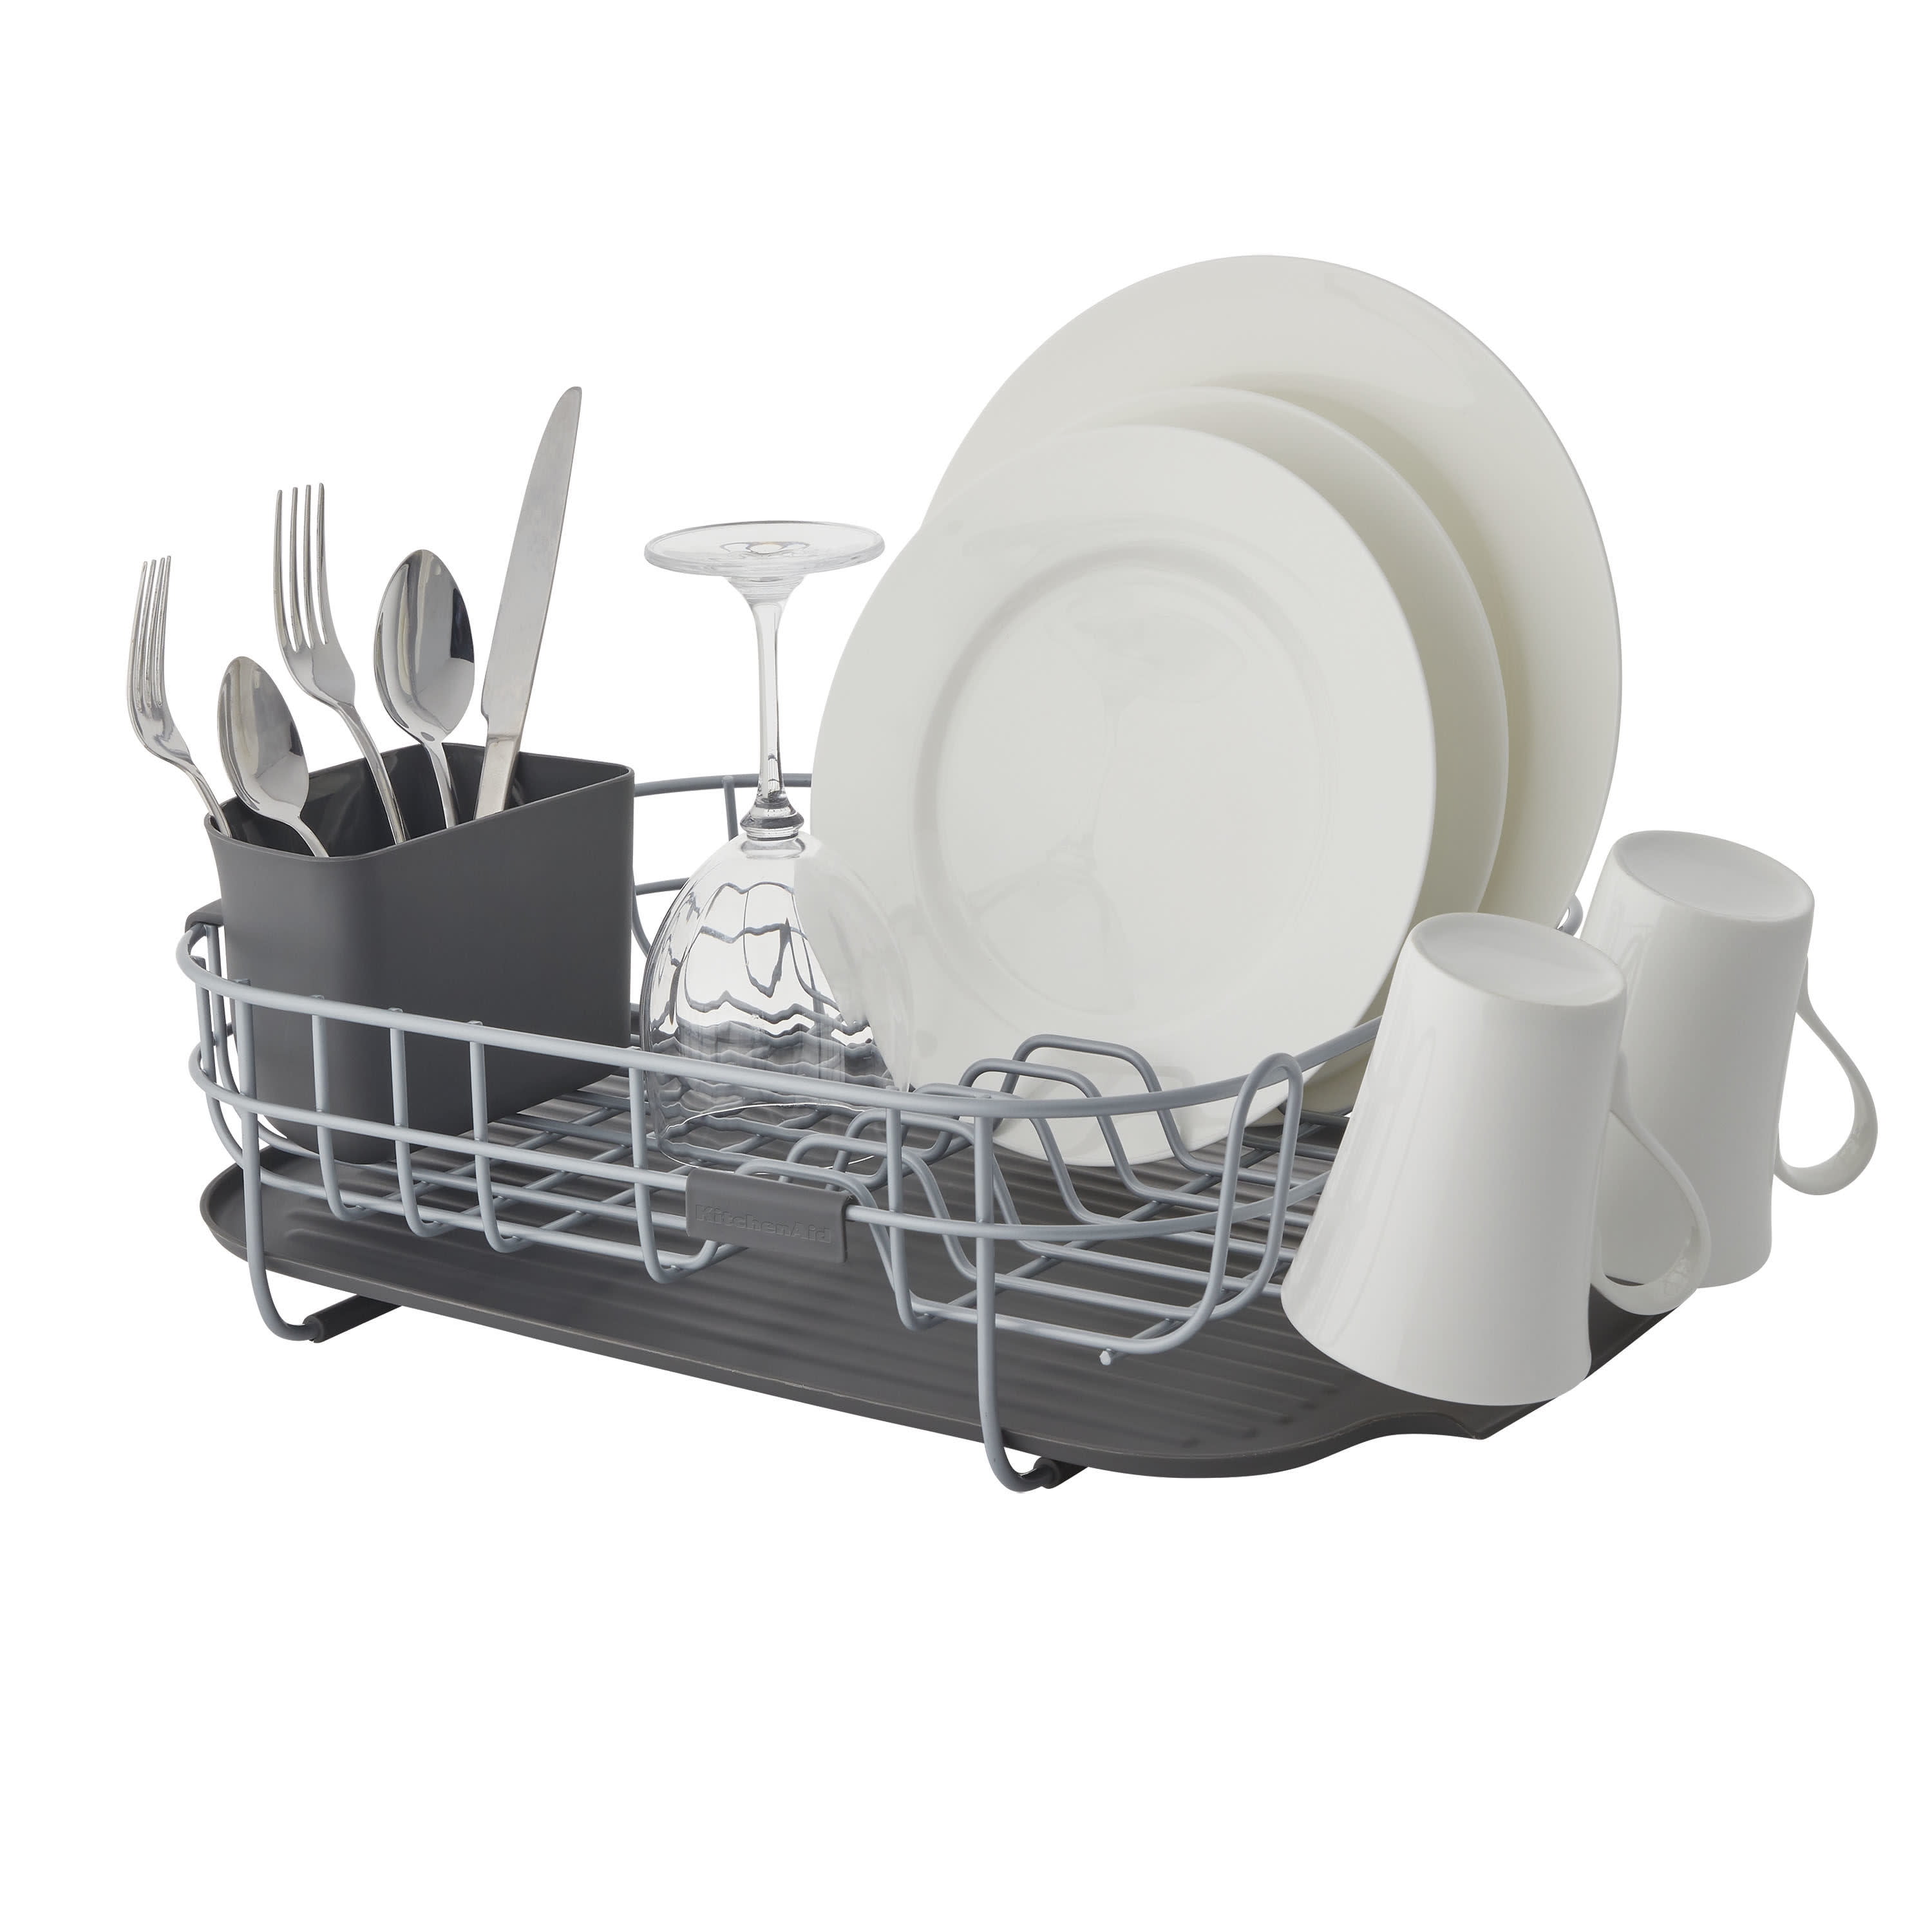 KitchenAid Compact, Space Saving Rust Resistant Dish Rack with Removable  Flatware Caddy and Angled Self Draining Drainboard, 16.06-Inch, Black